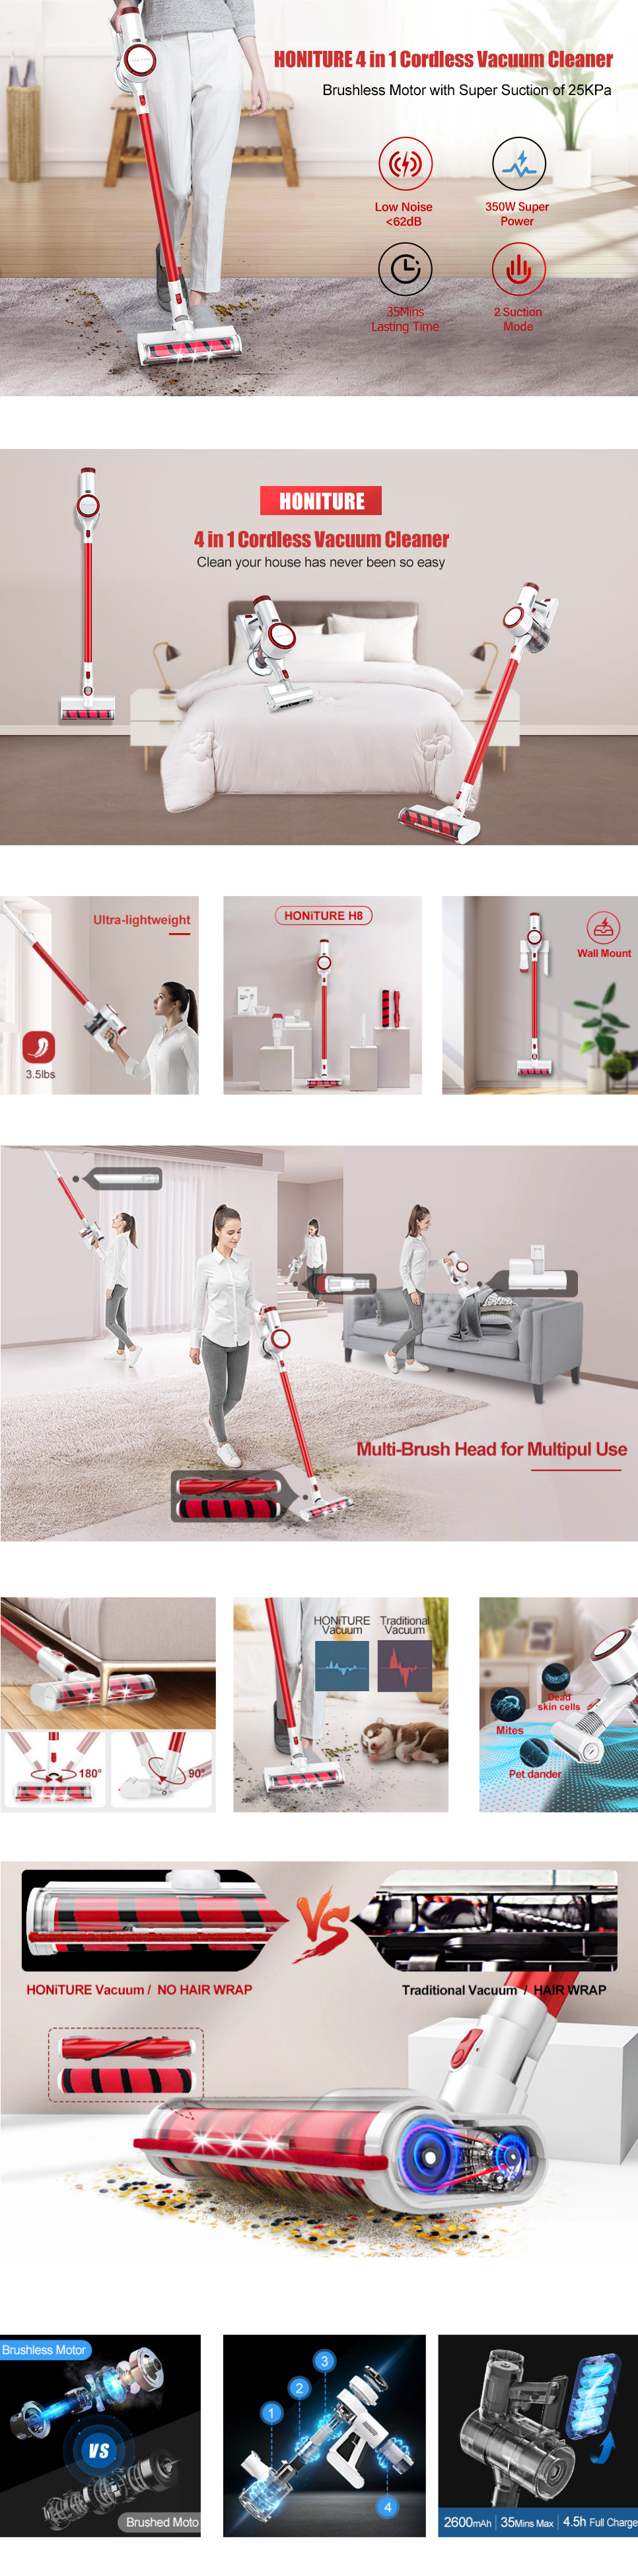  HONITURE Cordless Vacuum Cleaner, 380W 30Kpa Powerful Cordless  Stick Vacuum, 4 in 1 Lightweight Handheld Vacuum with 180 Foldable Tube  2500mAh*7 Battery for Home Hard Floor/Carpet/Bed/Pet Hair